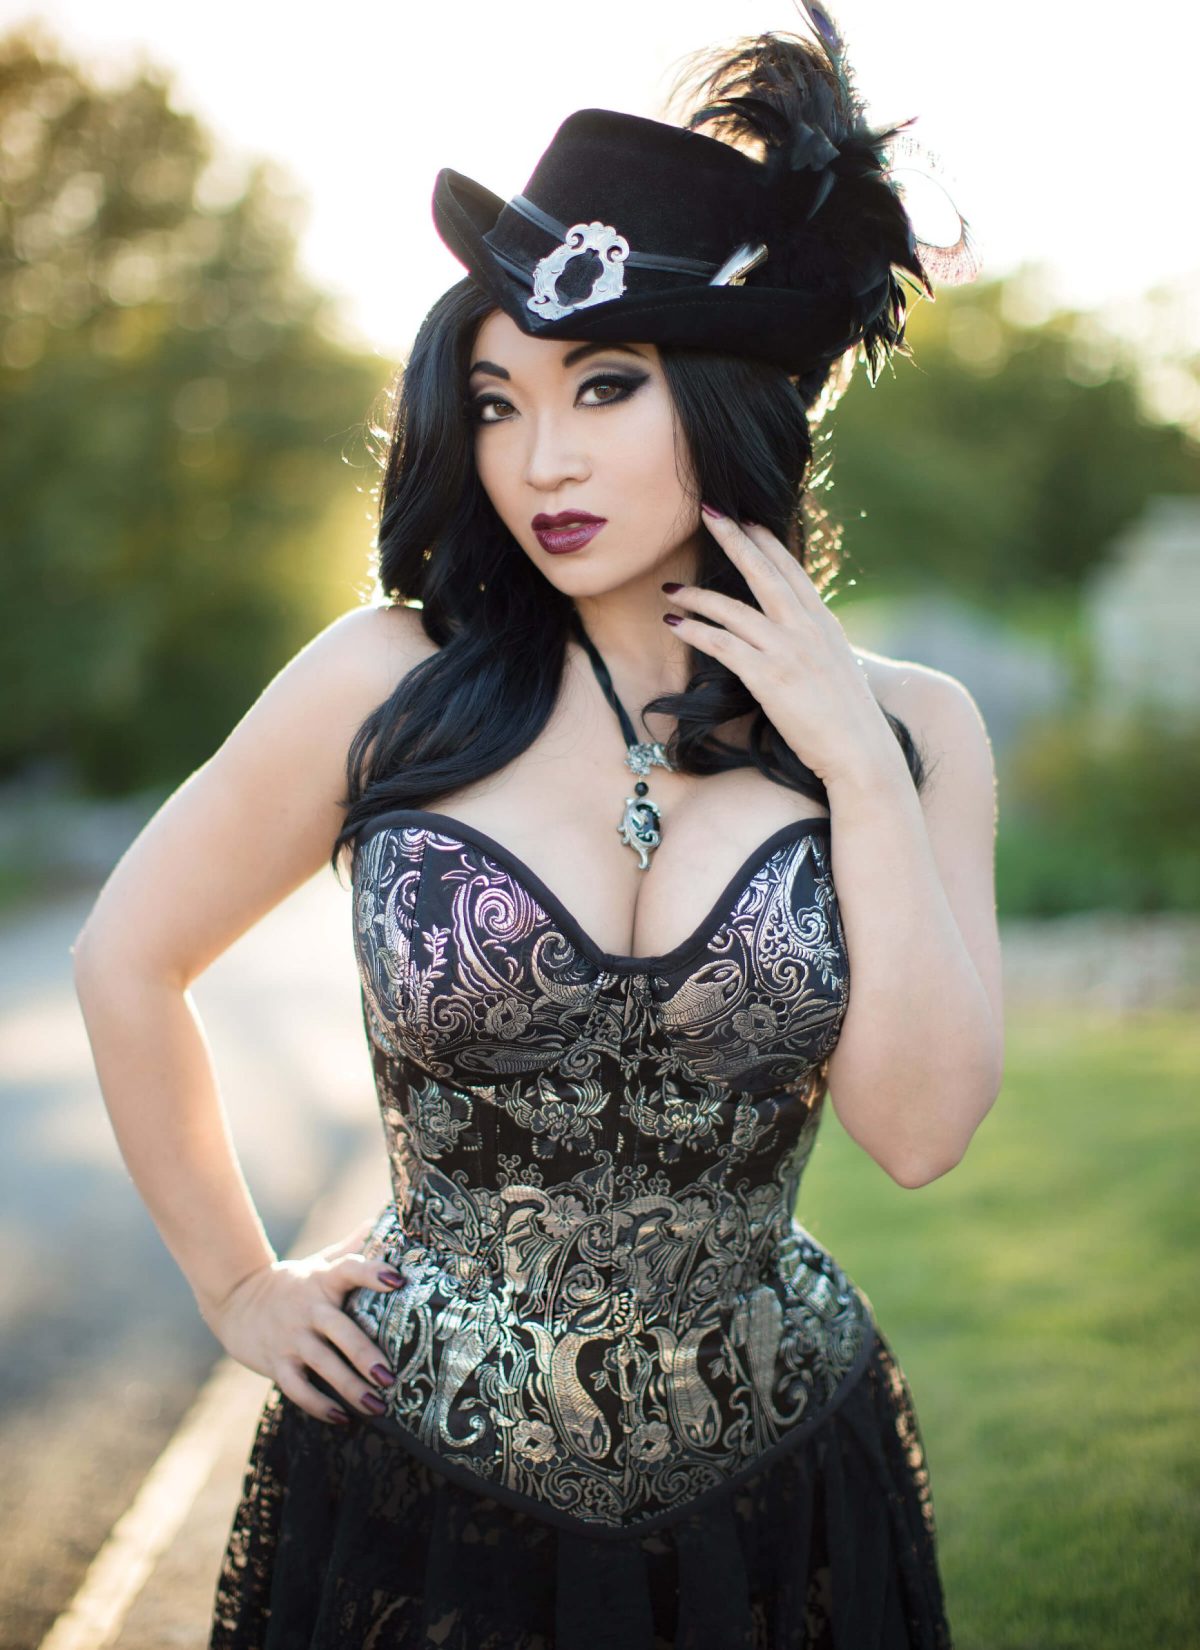 McCall's Sewing Pattern M7339 Misses' Overbust or Underbust Corsets by Yaya Han